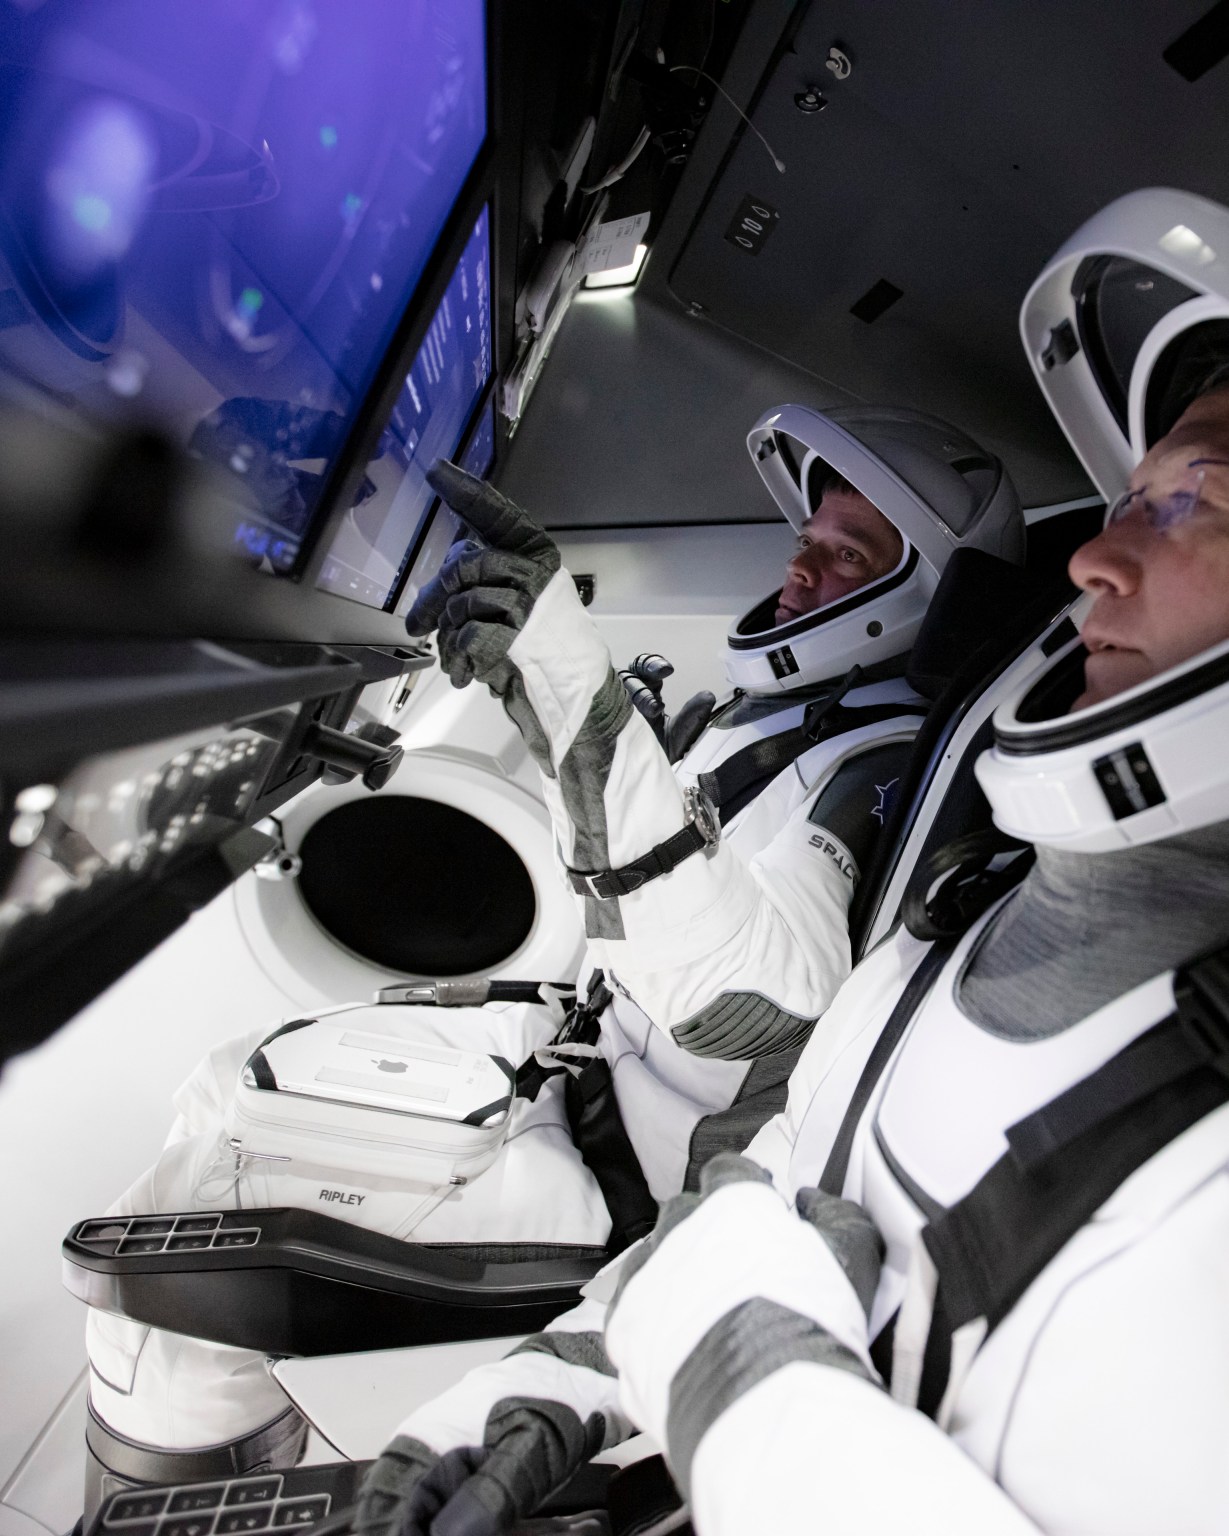 SpaceX teams at NASA’s Kennedy Space Center in Florida and the company’s Mission Control in Hawthorne, California, and NASA flight controllers in Mission Control Houston, executed a full simulation of launch and docking of the Crew Dragon spacecraft.